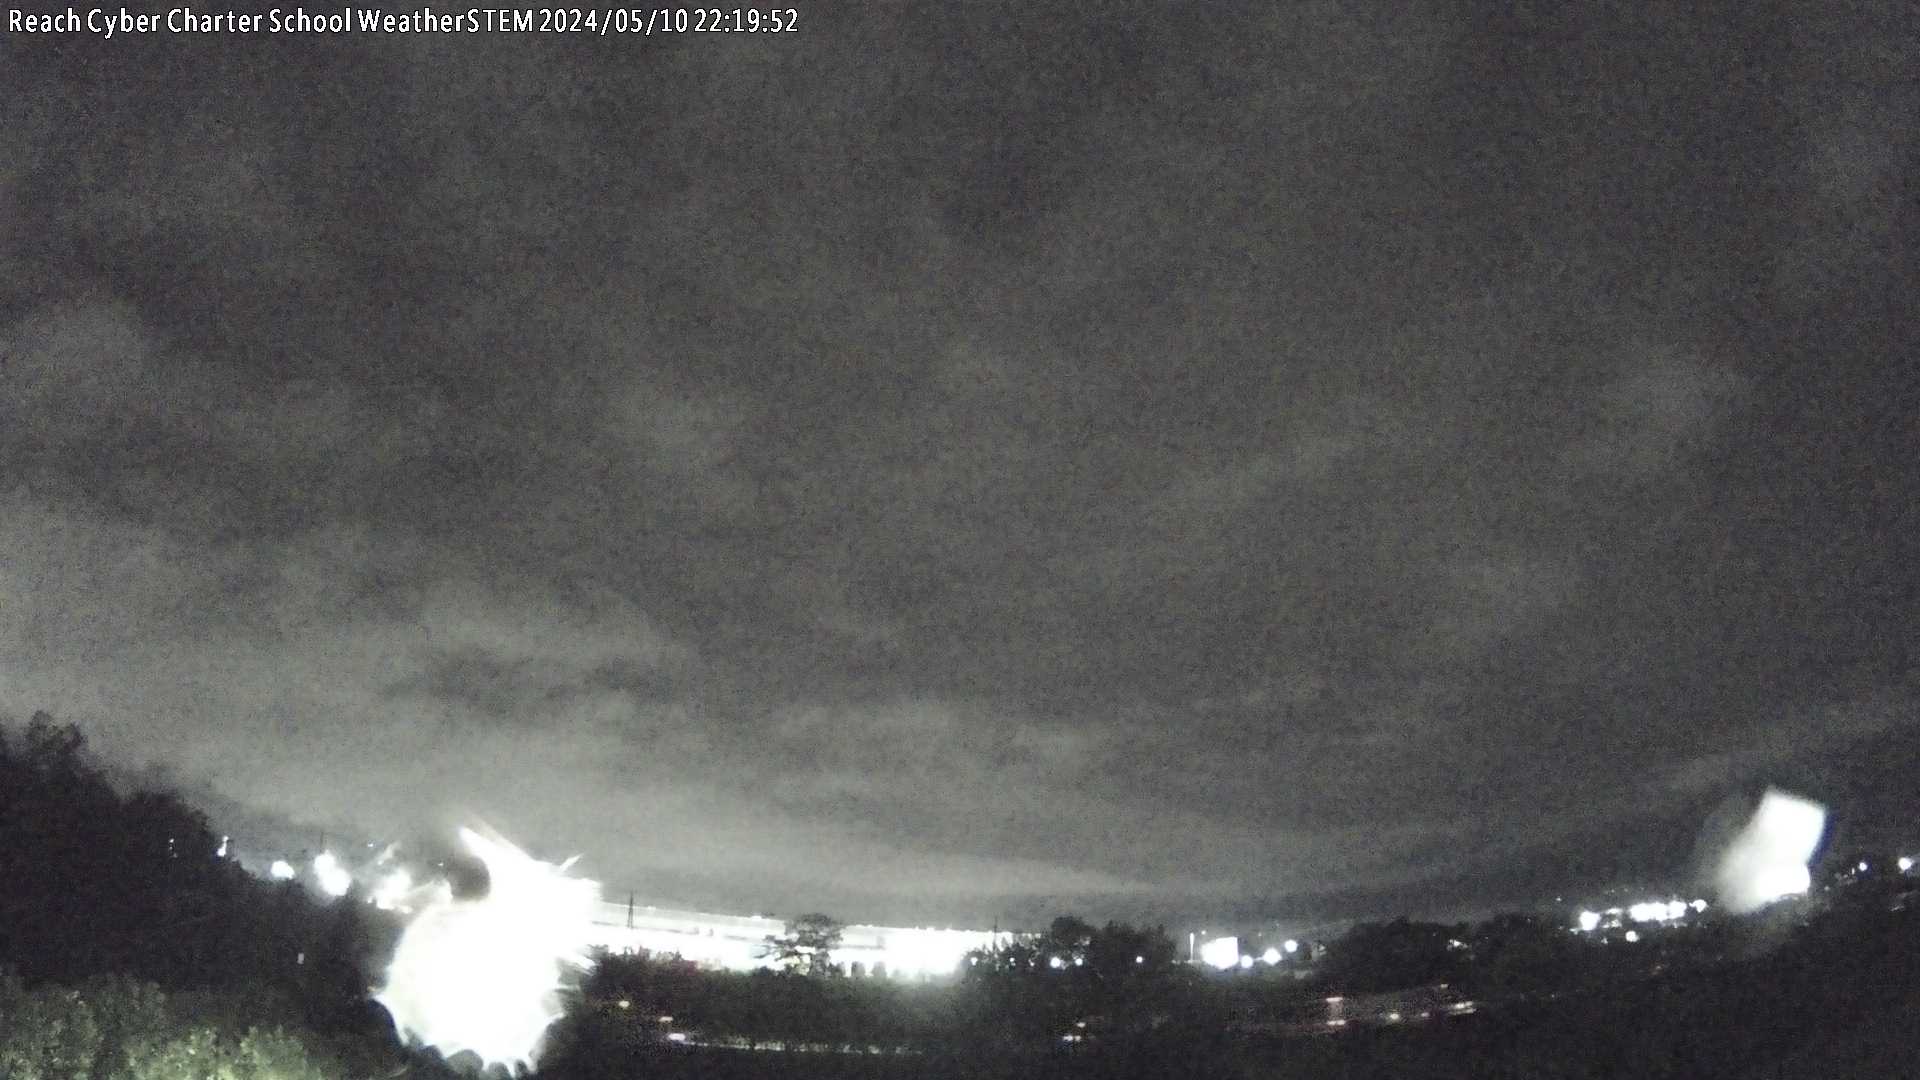  WeatherSTEM Cloud Camera RCCSWxSTEM in Dauphin County, Pennsylvania PA at Reach Cyber Charter School